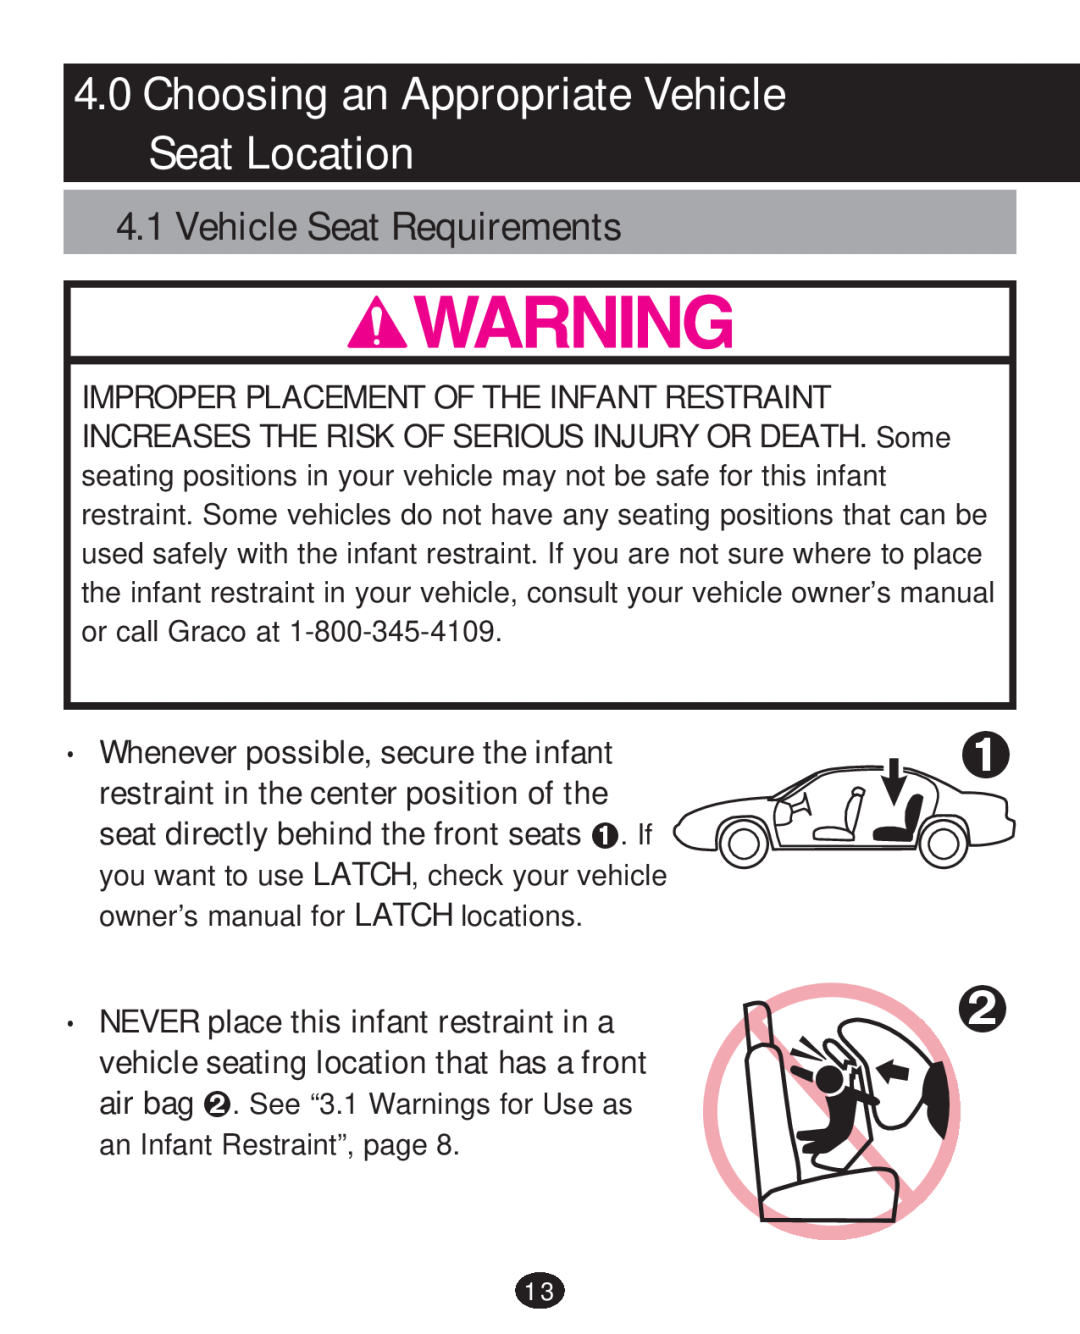 Graco 30 manual Choosing an Appropriate Vehicle Seat Location, Vehicle Seat Requirements 